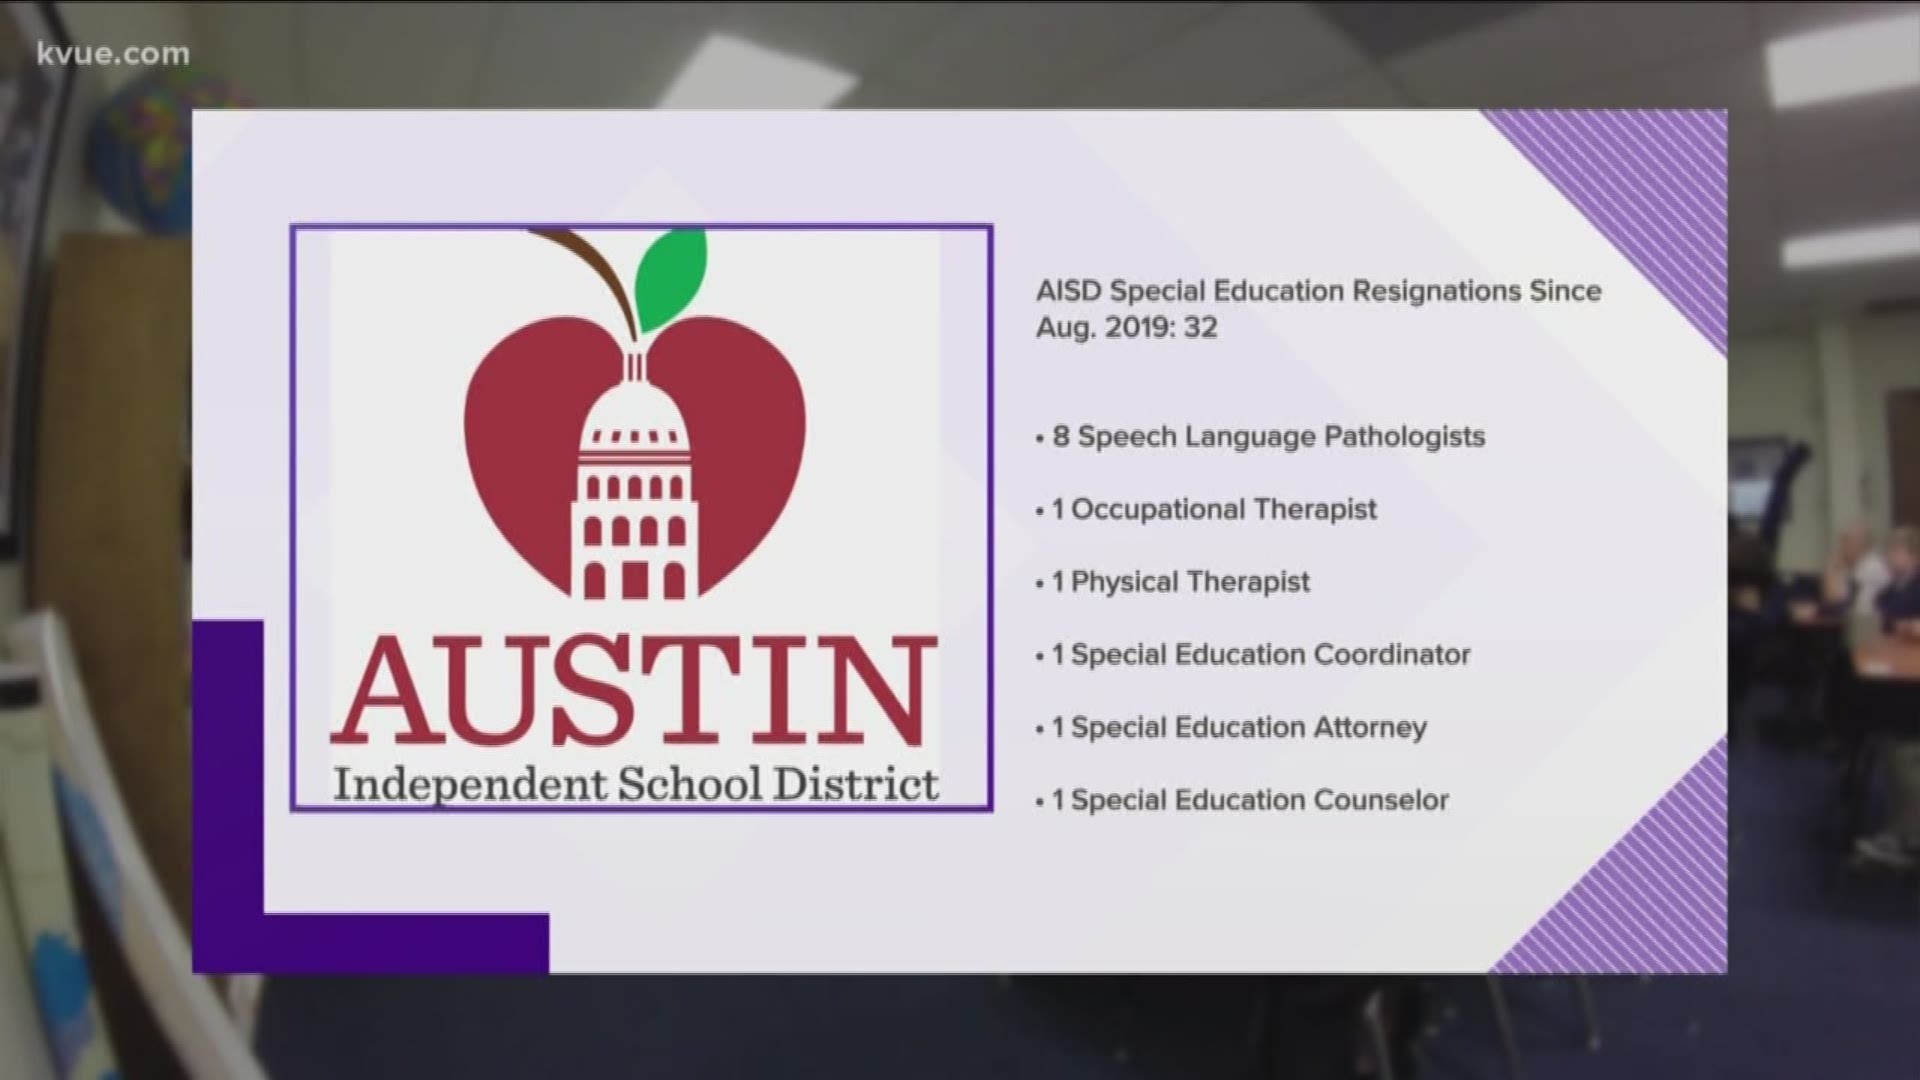 More than 30 Austin ISD special education employees have resigned since August, saying they're "overworked and underpaid."